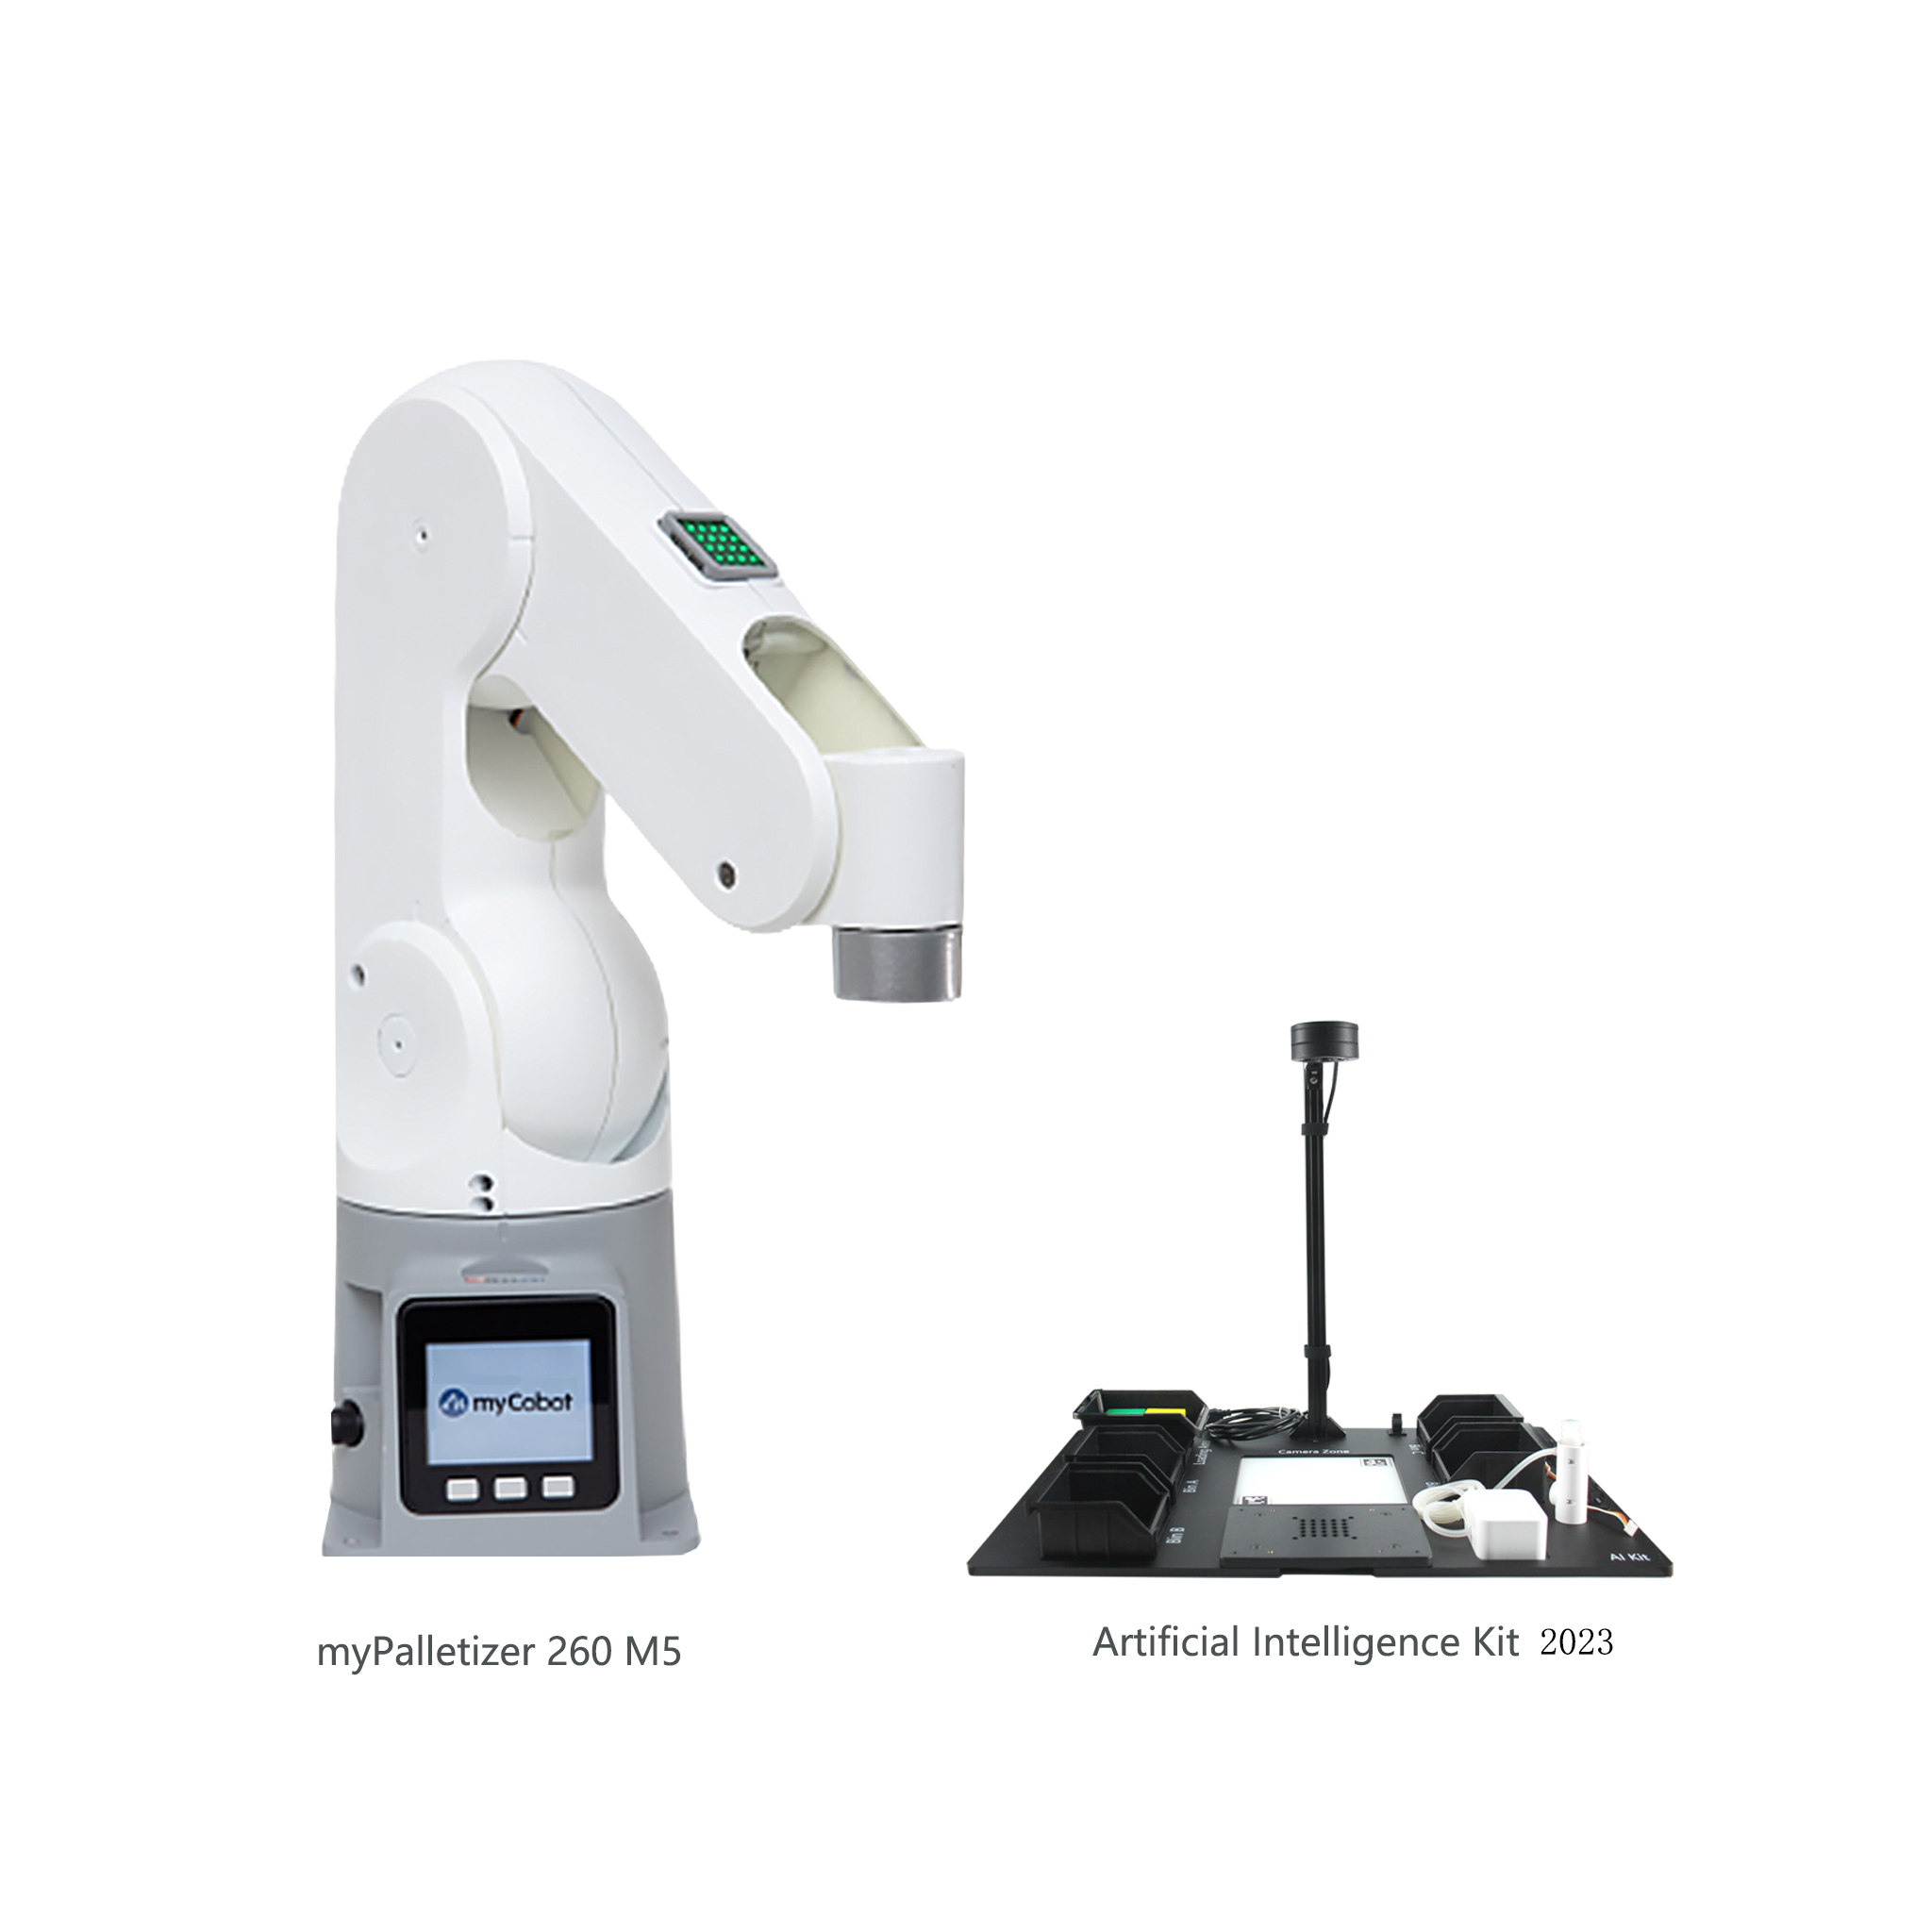 myPalletizer 260 M5Stack - The Most Compact 4-axis Robotic Arm (Dual Screen Version)